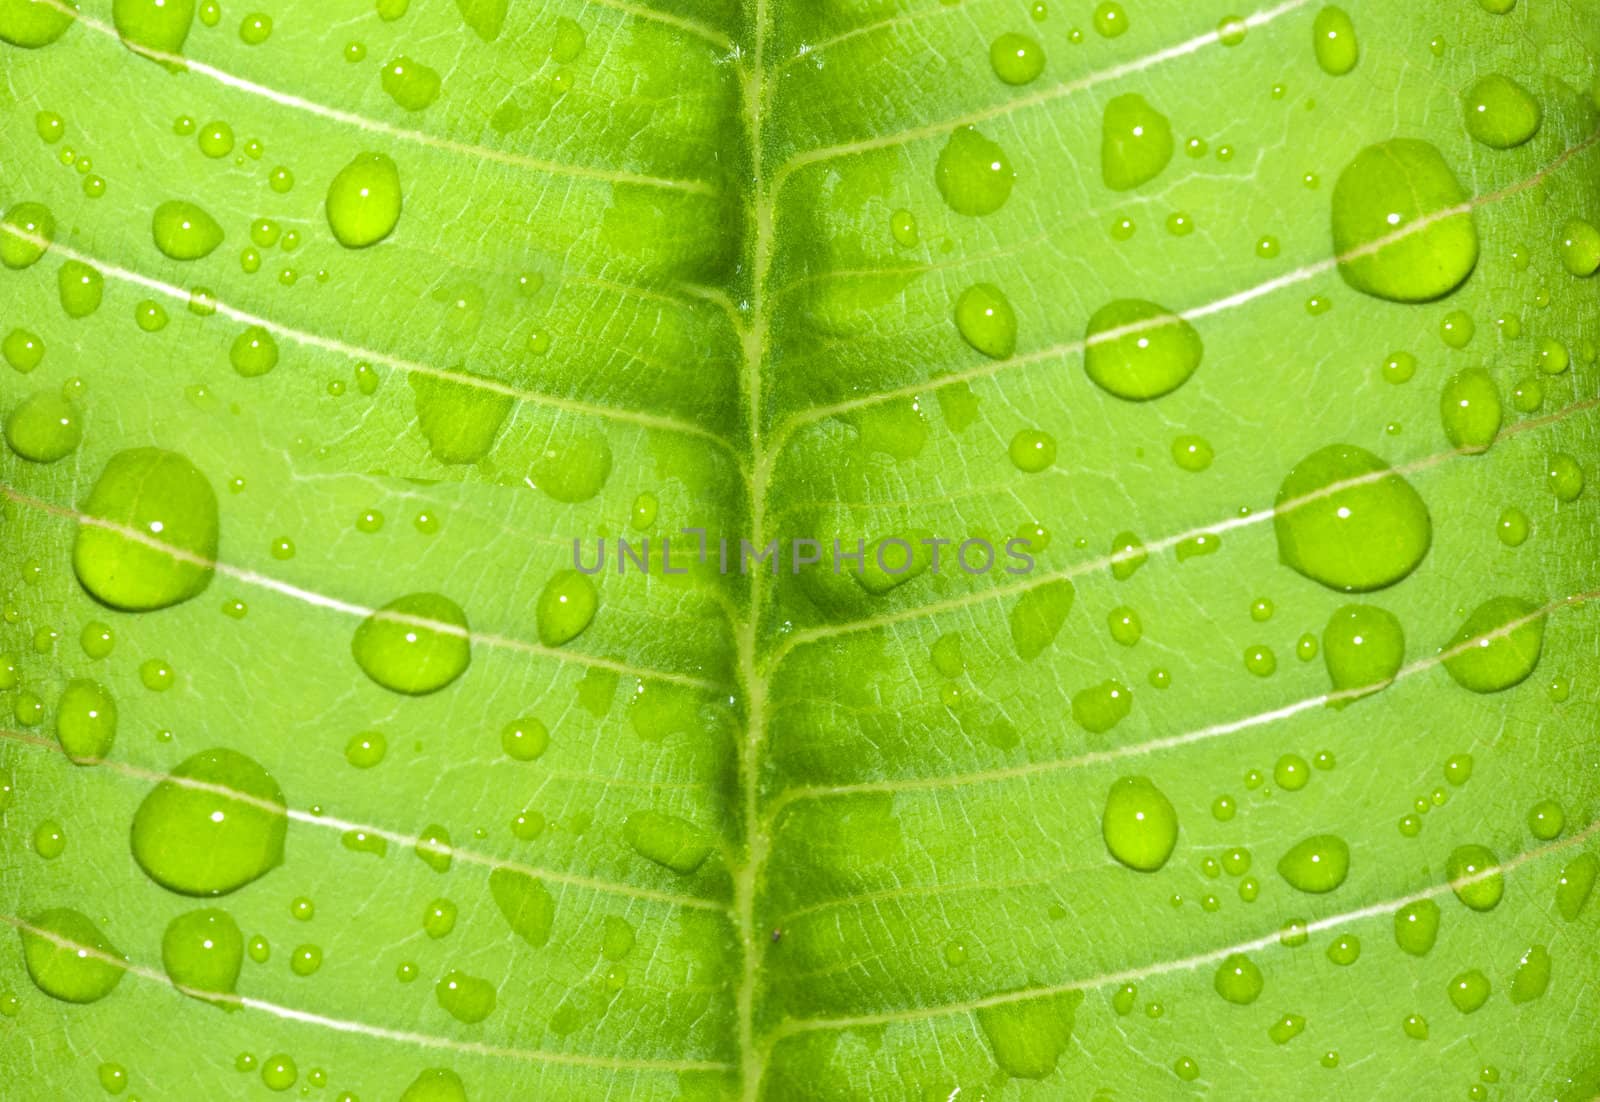 water-drop on a green leaf after rain
